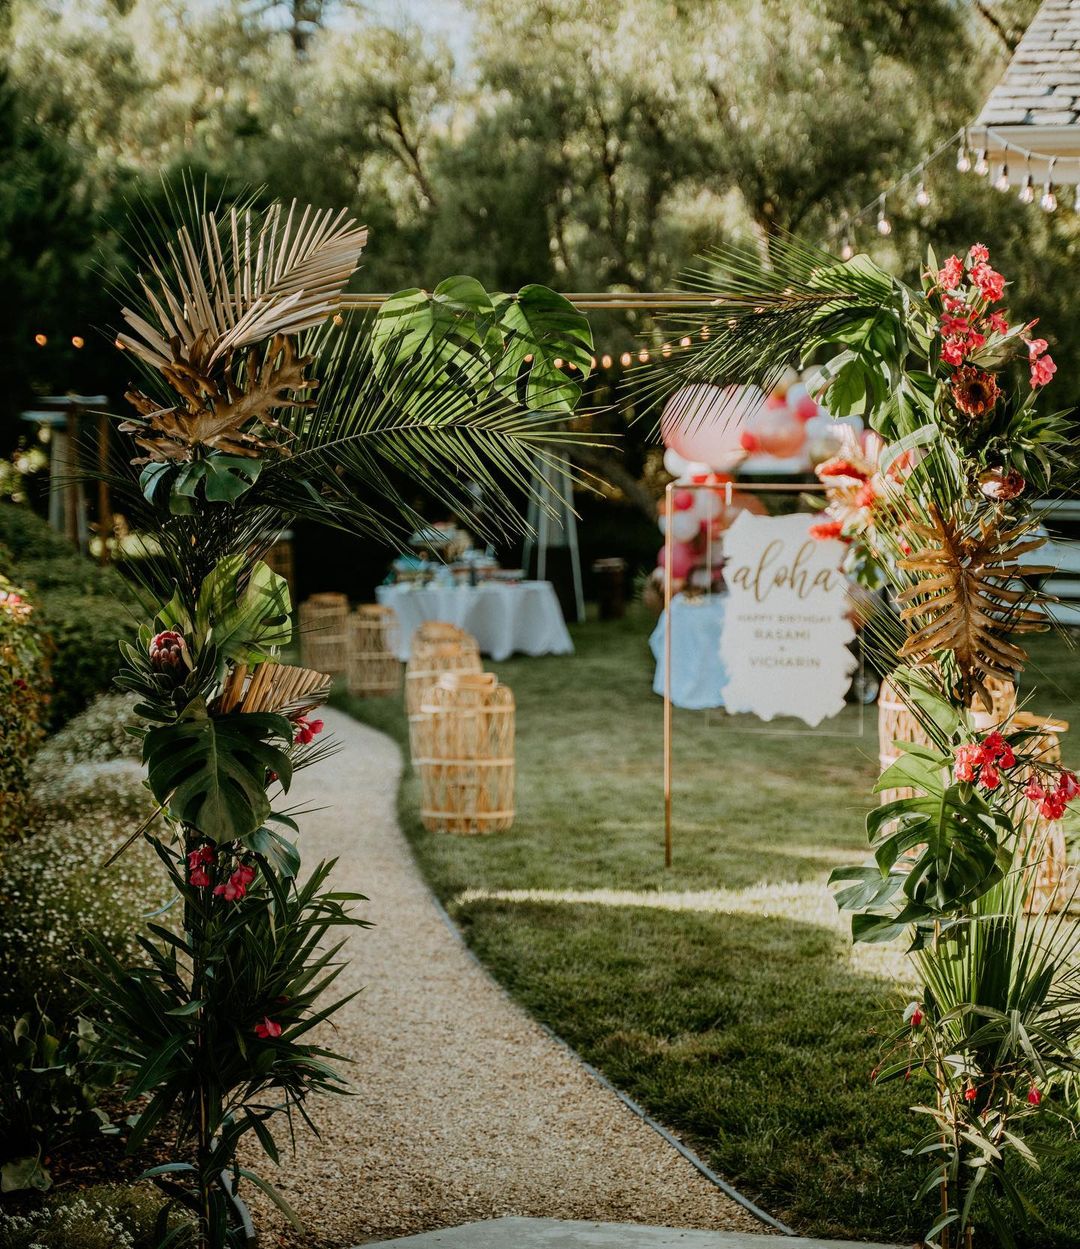 Backyard Set Up with a Luau Party Theme. Photo by Instagram user @alinebicharapartydecor